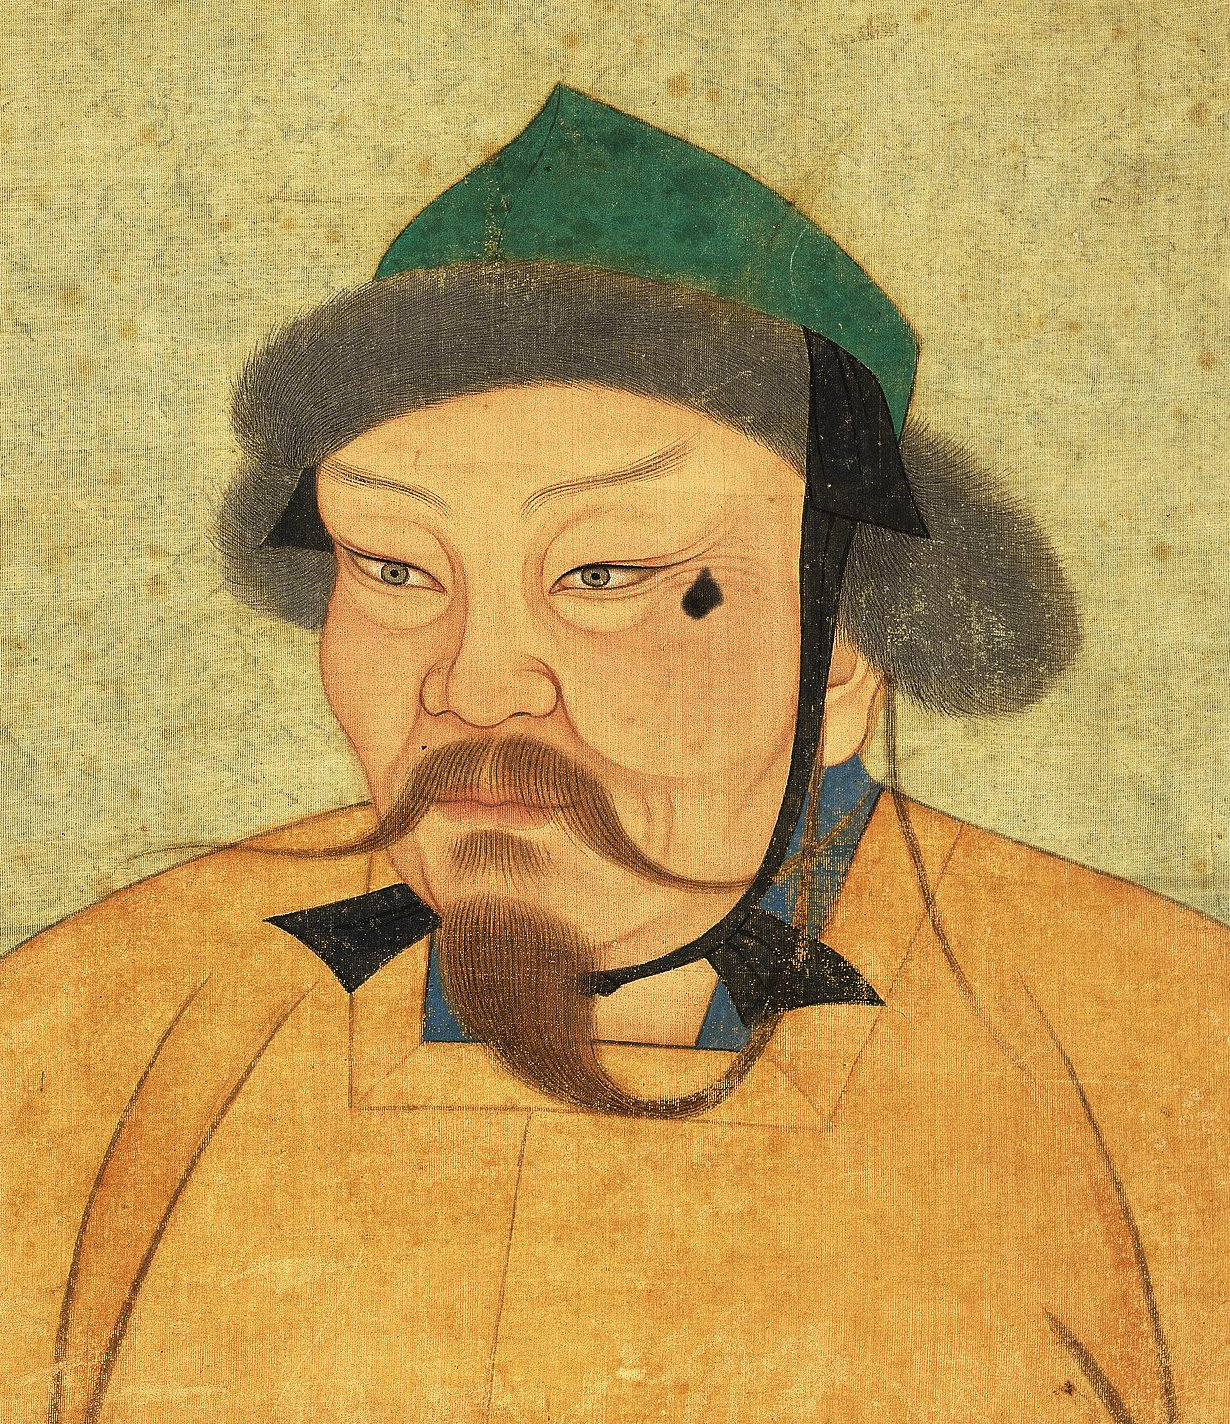 The painting is of Genghis Khan's son Ögedei Khan wearing a green hat and a yellow robe.